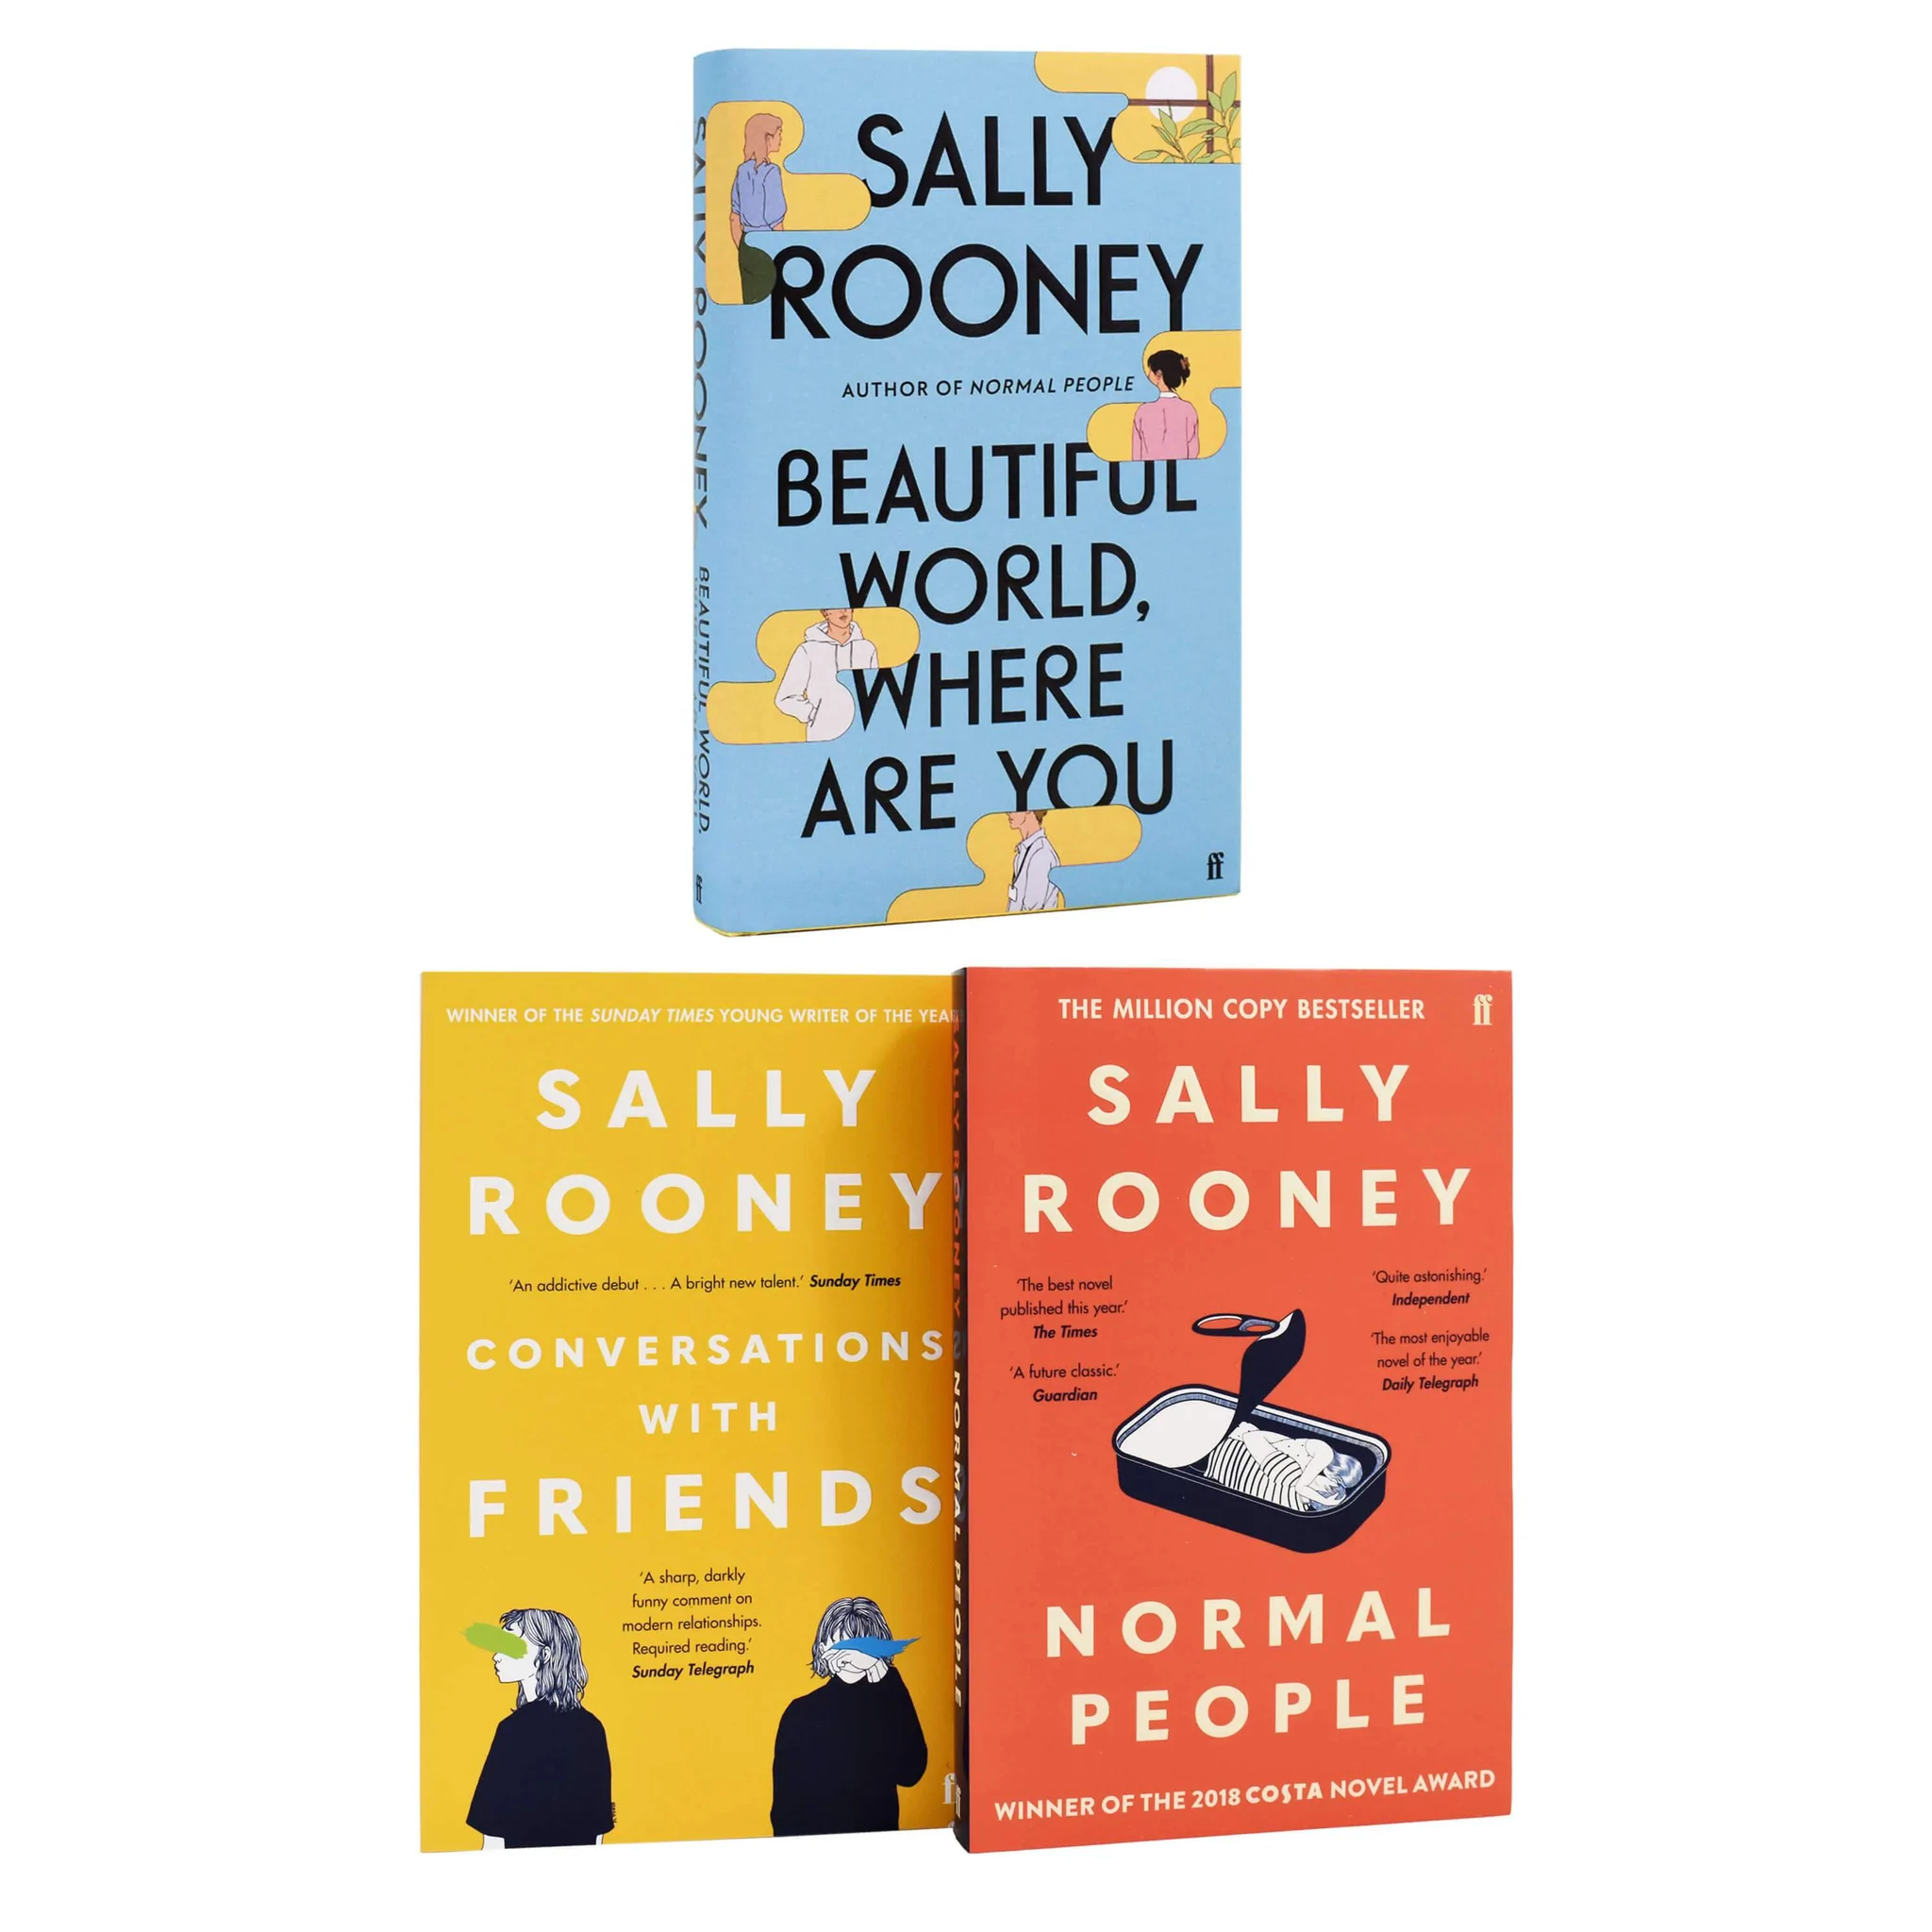 Sally Rooney’s metamodernism novels to date. Top: Beautiful World Where Are You (2021); bottom right: Normal People (2018); bottom left: Conversations With Friends (2017).